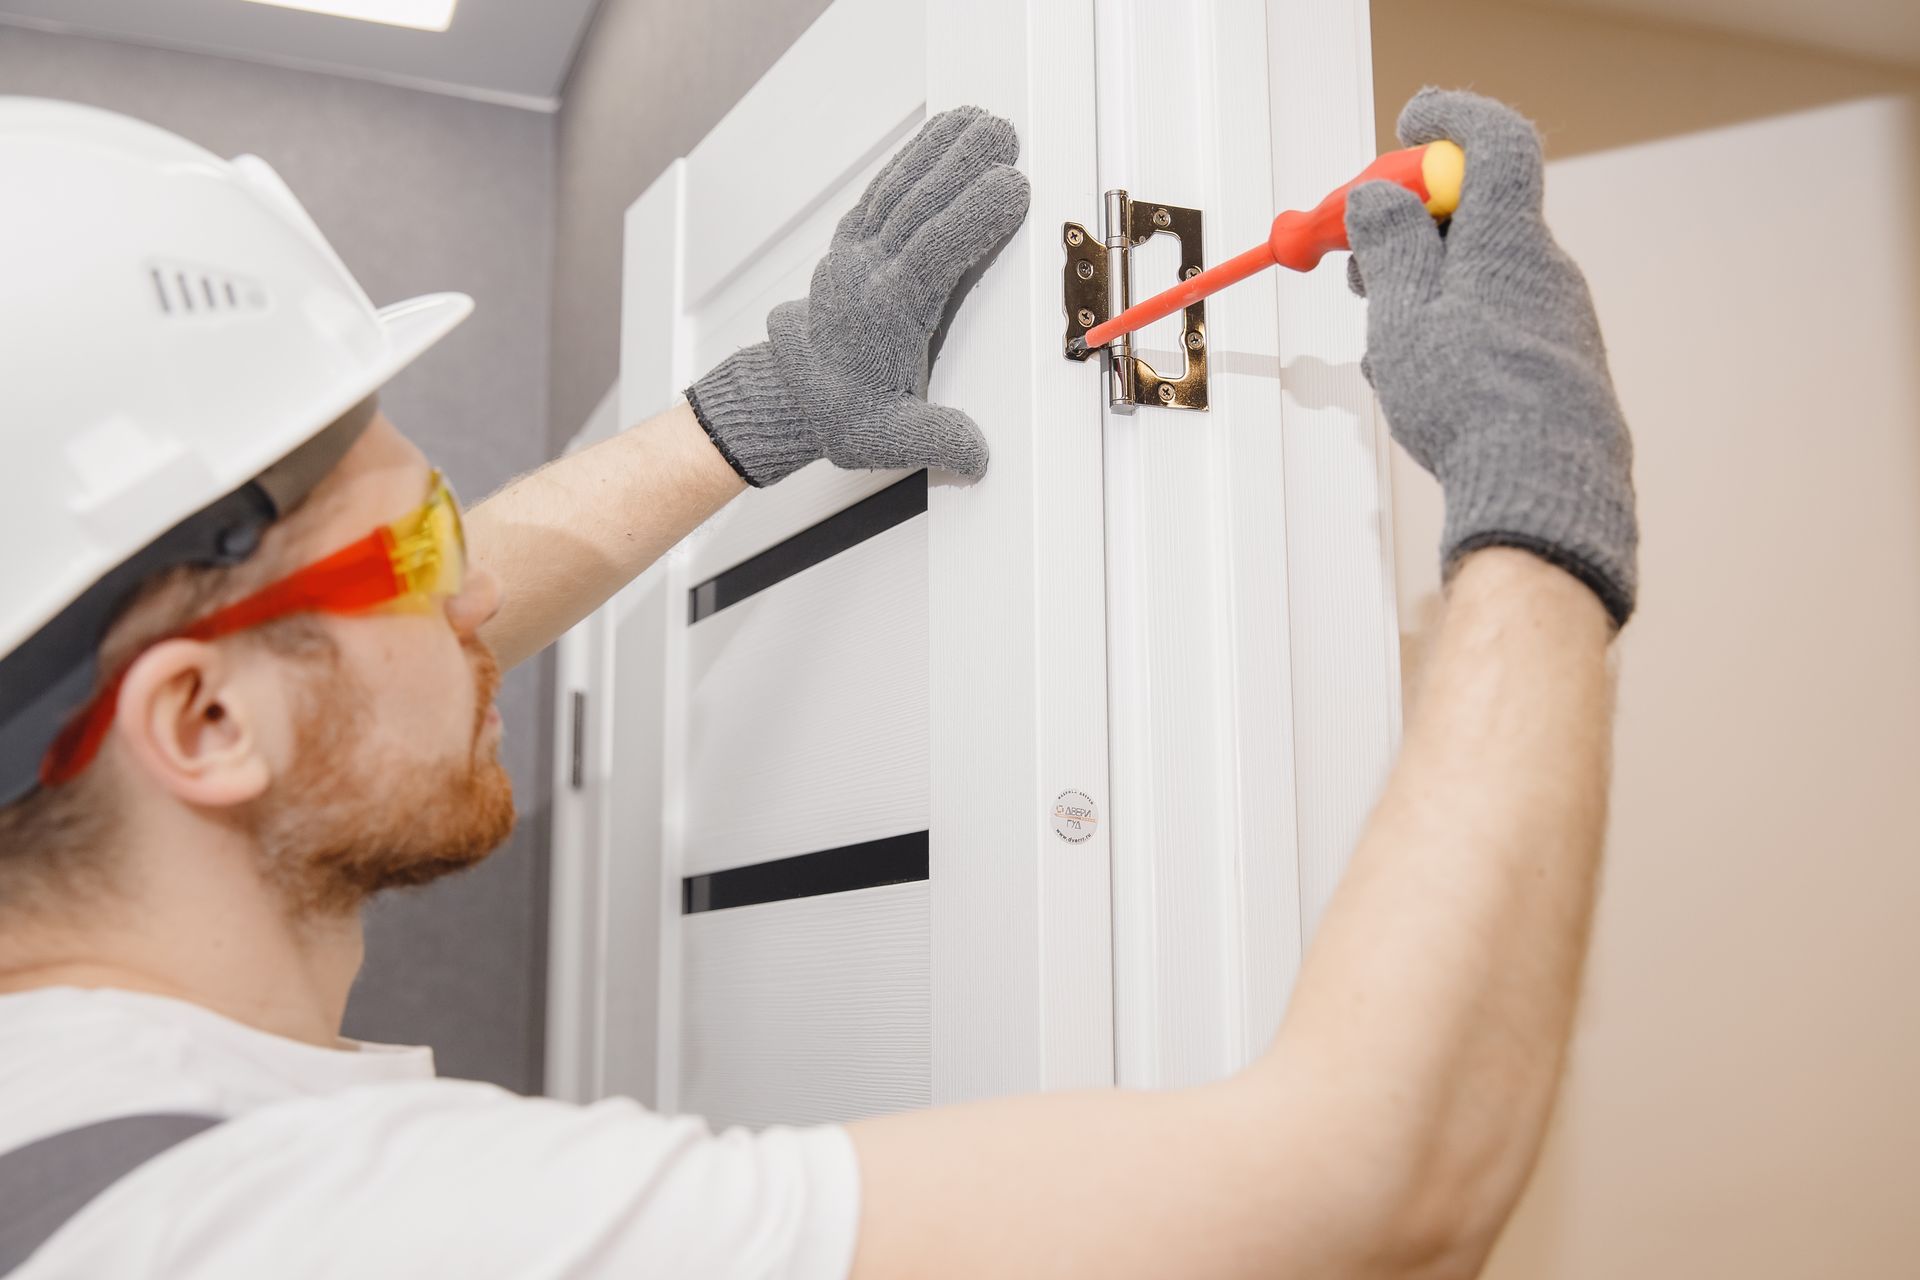 A handyman is installing a wood door and is seen in the process of tightening the lock.